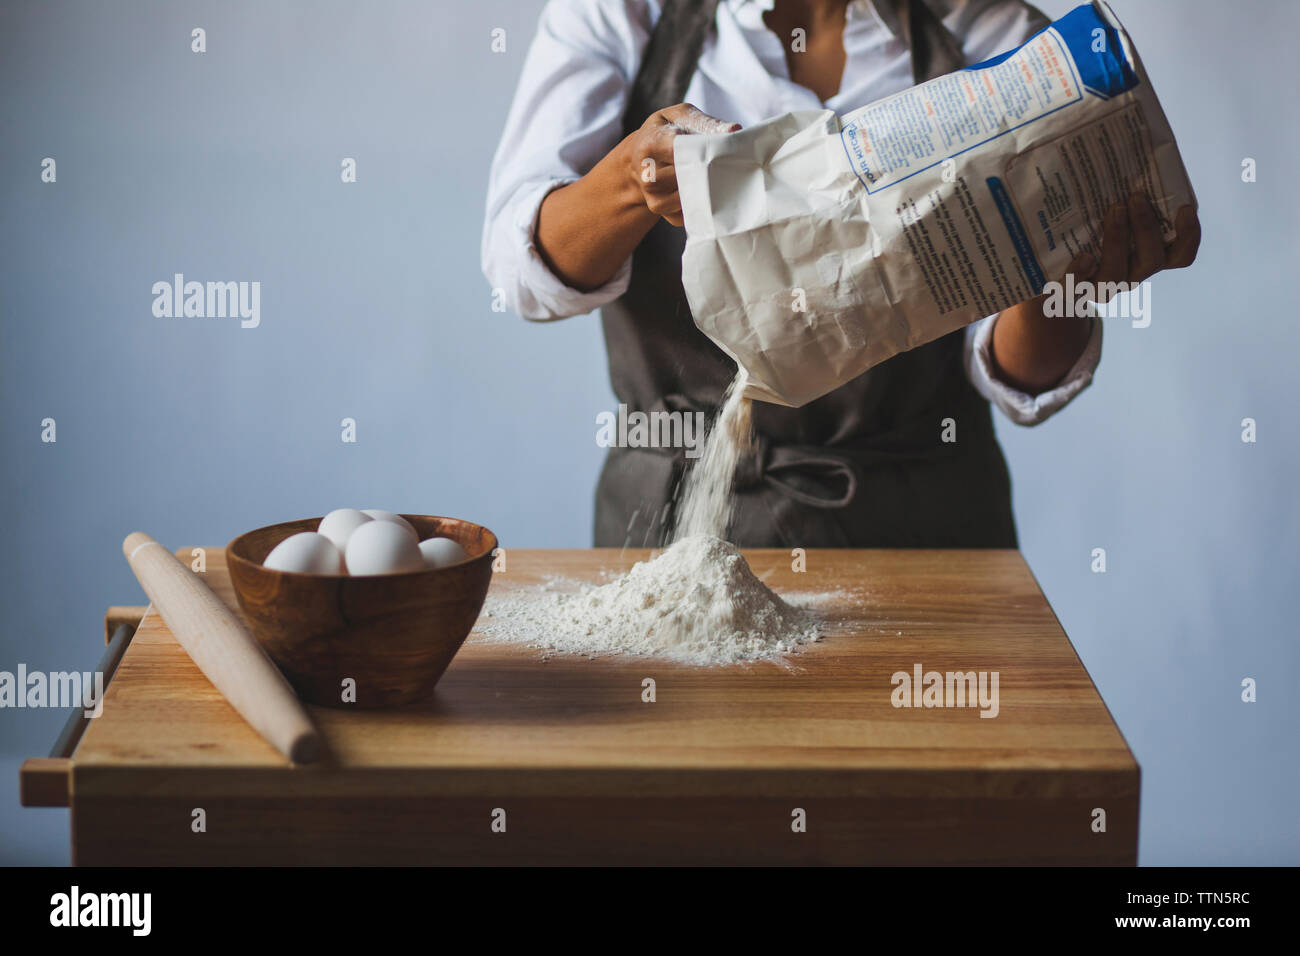 Midsection of woman removing flour from packet on table against wall Stock Photo